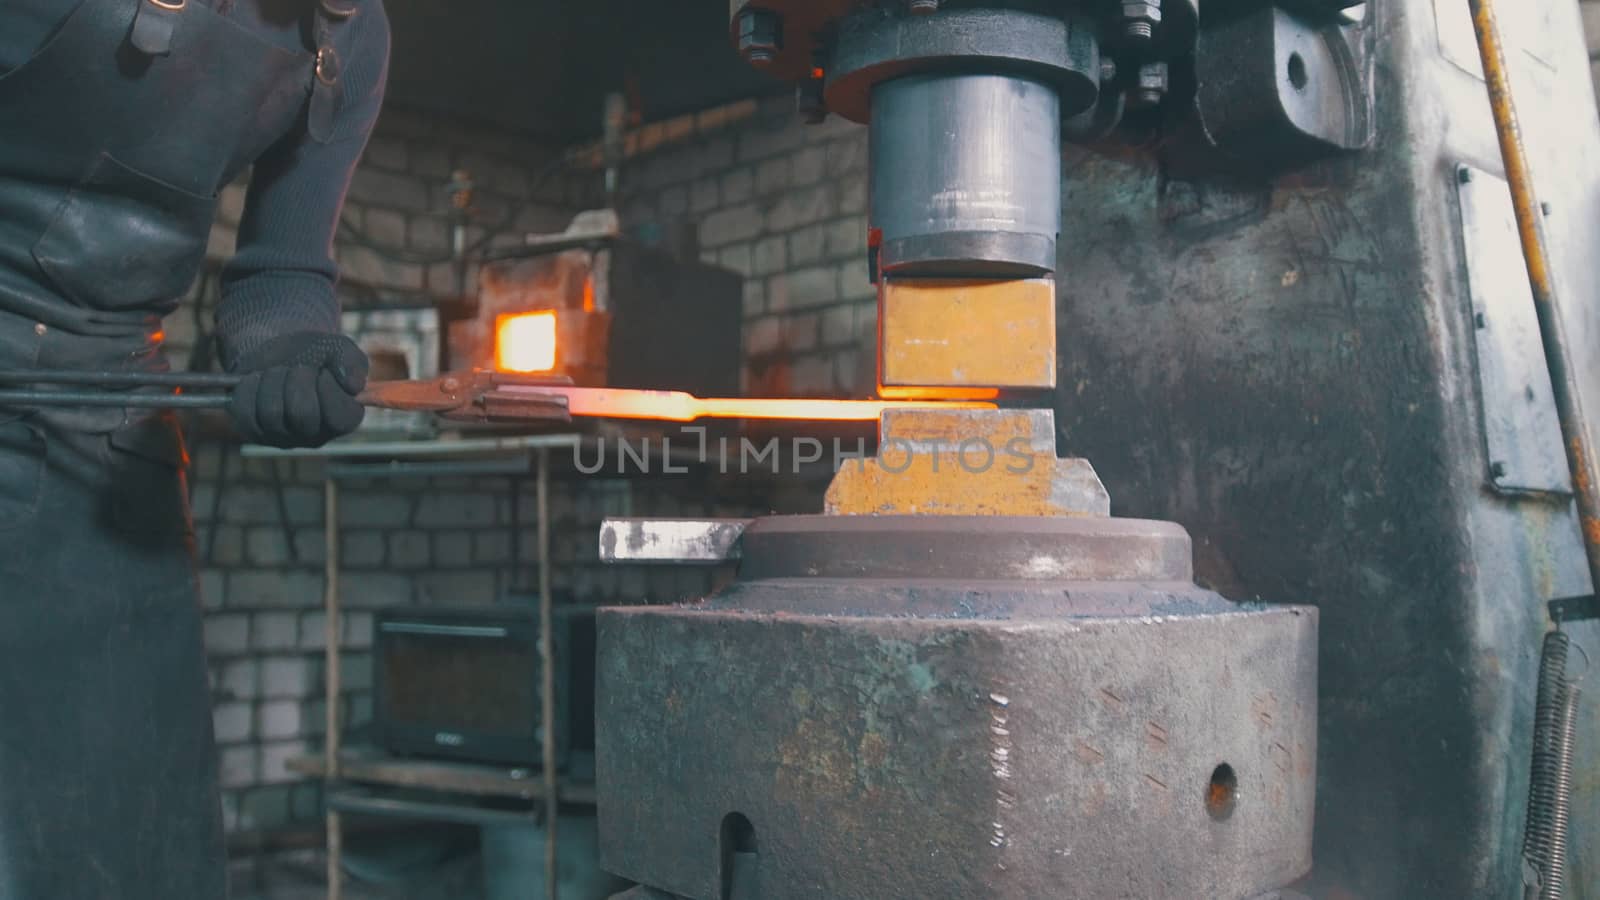 Automatic hammering - blacksmith forging red hot iron on anvil, extreme close-up by Studia72